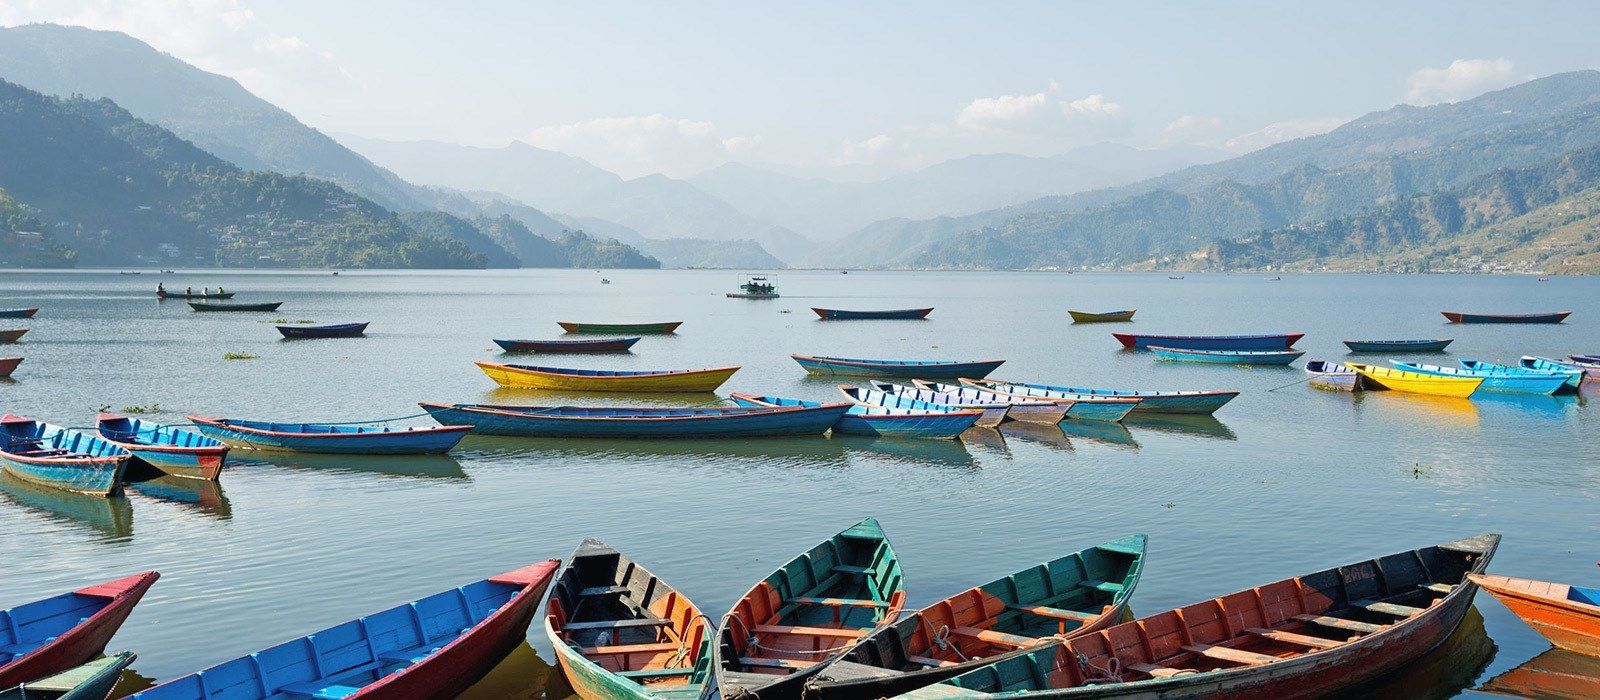 Exclusive Travel Tips For Your Destination Pokhara In Nepal